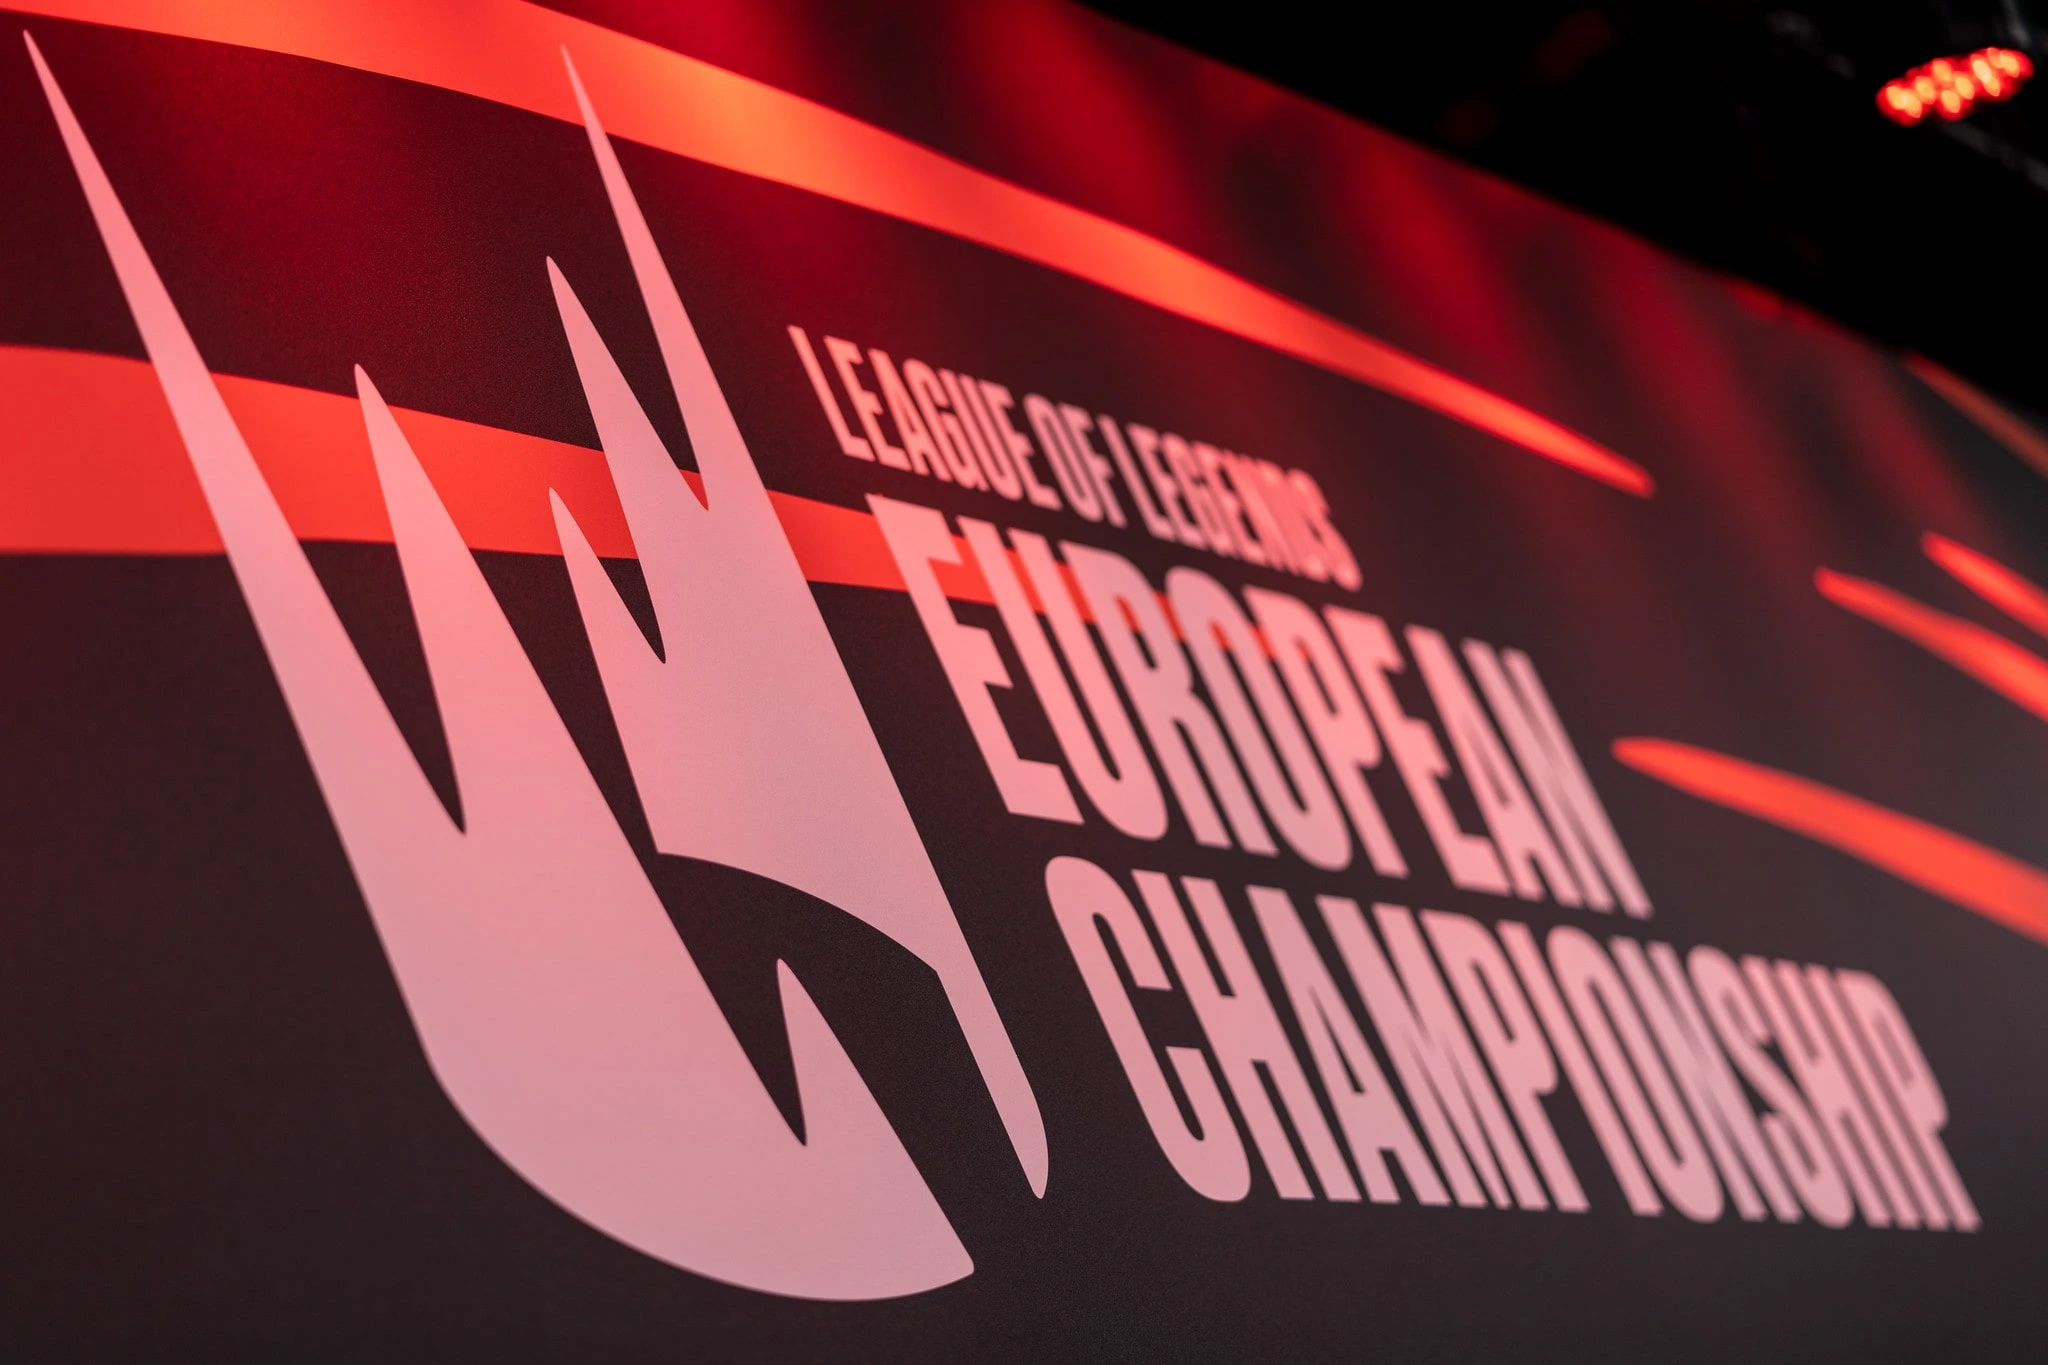 All you need to know before the 2023 LEC Summer Split starts